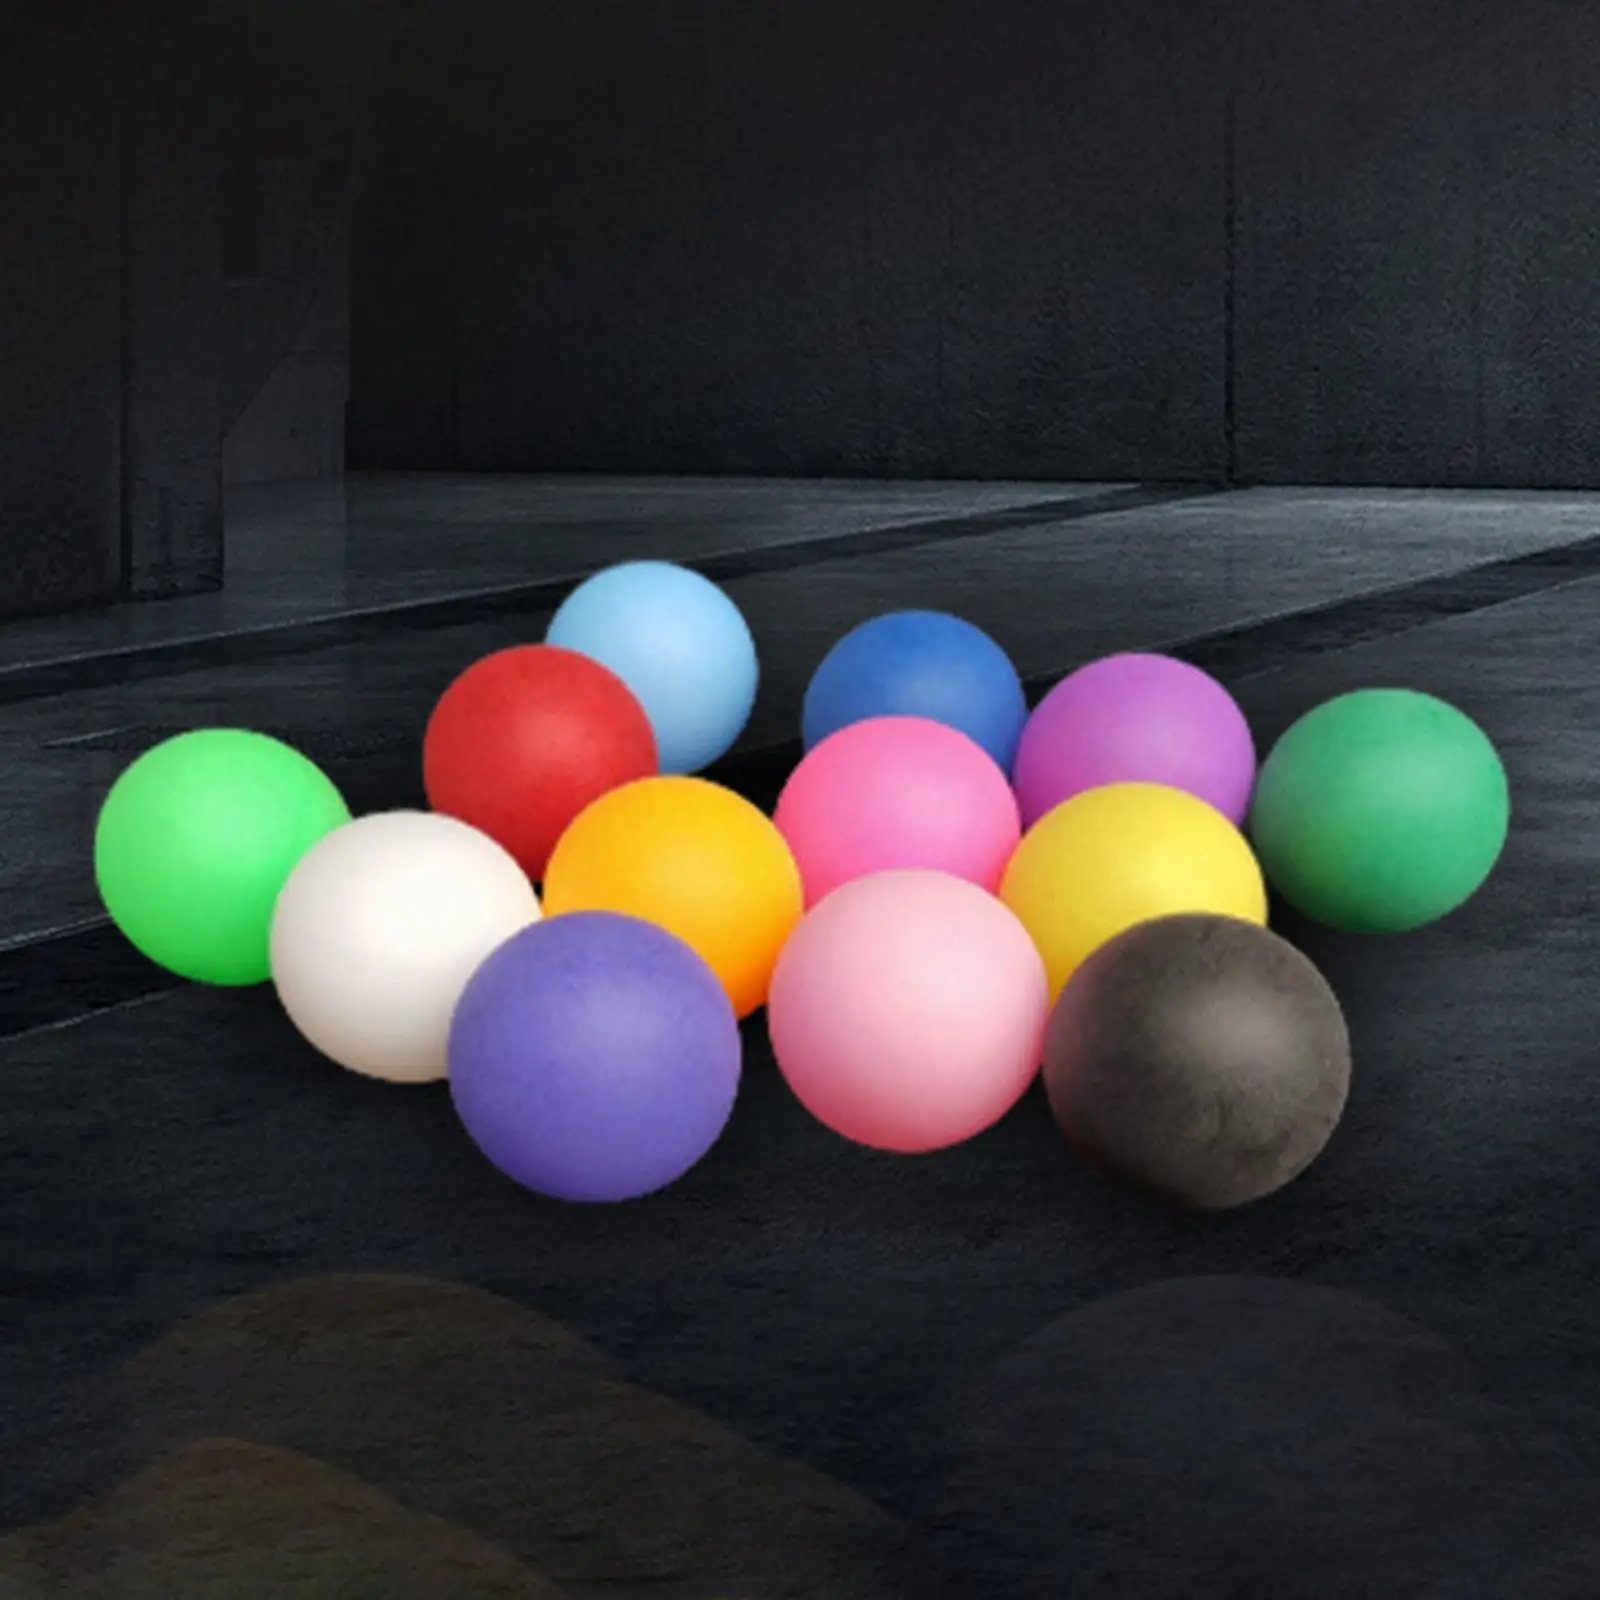 150x 40mm Table Tennis Balls Ping Pong Balls Mixed Colors Bouncy Balls for Recreational Play School Games Carnival Pet Toys